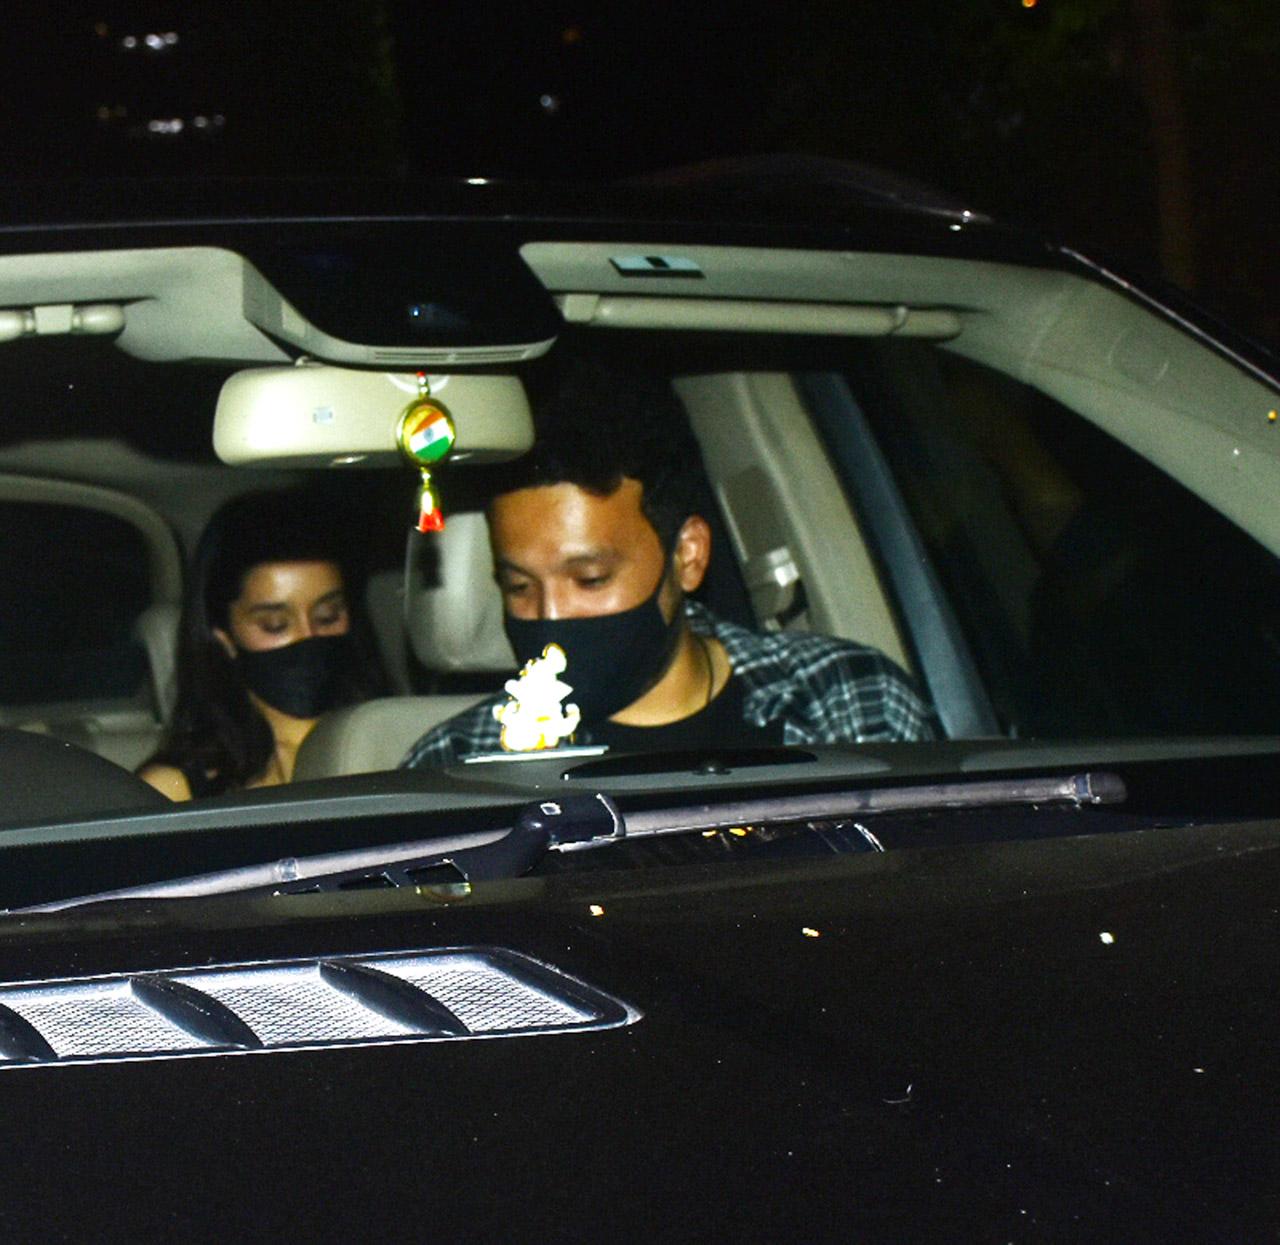 On Saturday night, Rohan Shrestha hosted his birthday bash at a Worli restaurant, which was attended by several B-Town folks including Ranveer Singh. His alleged girlfriend Shraddha Kapoor played the perfect hostess and the couple were spotted making an exit together in the same car. (All photos/Yogen Shah)